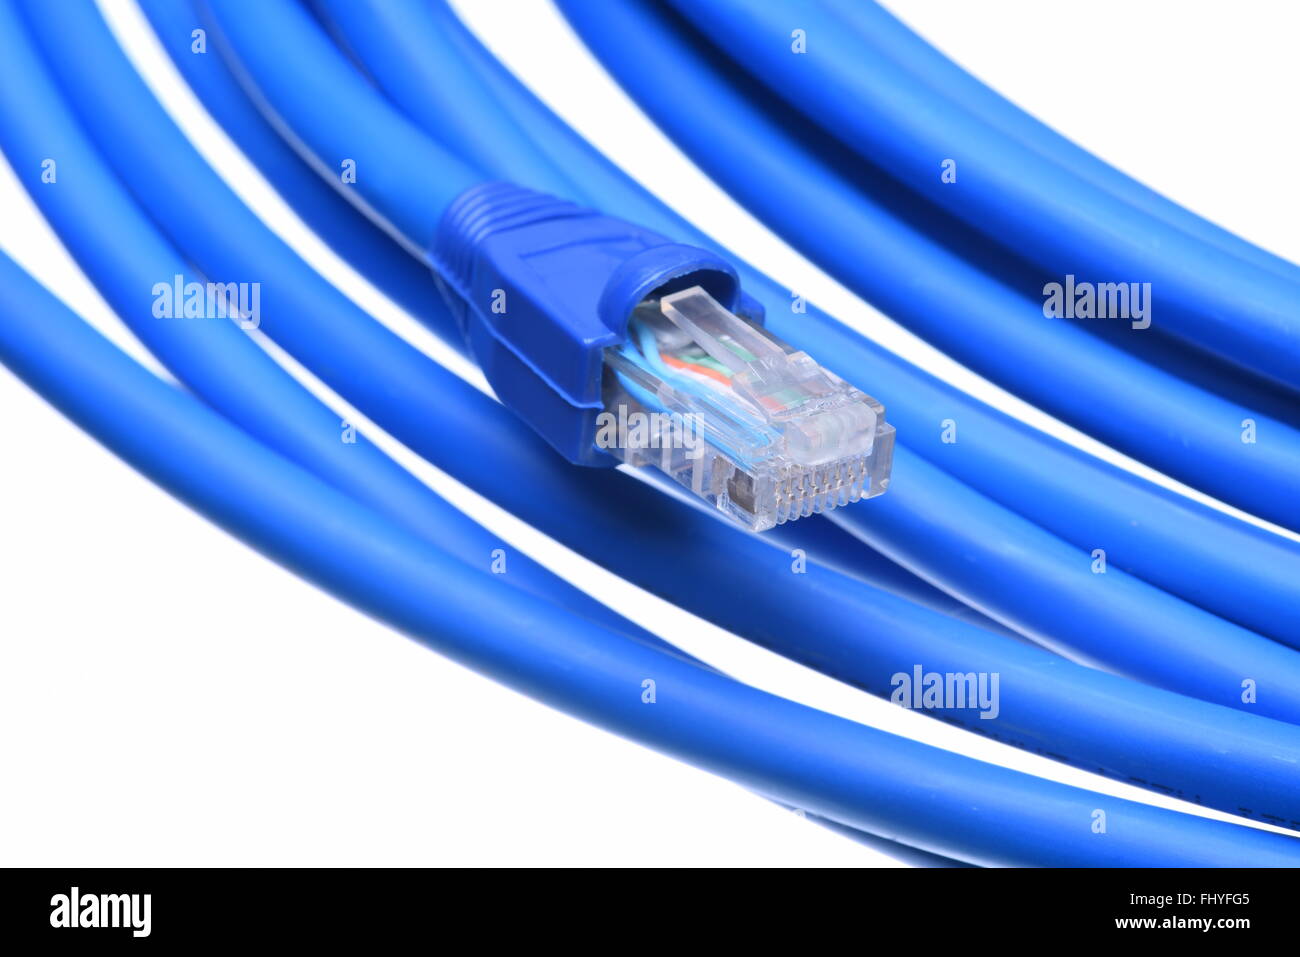 Blue computer network cable with plug isolated on white background Stock Photo